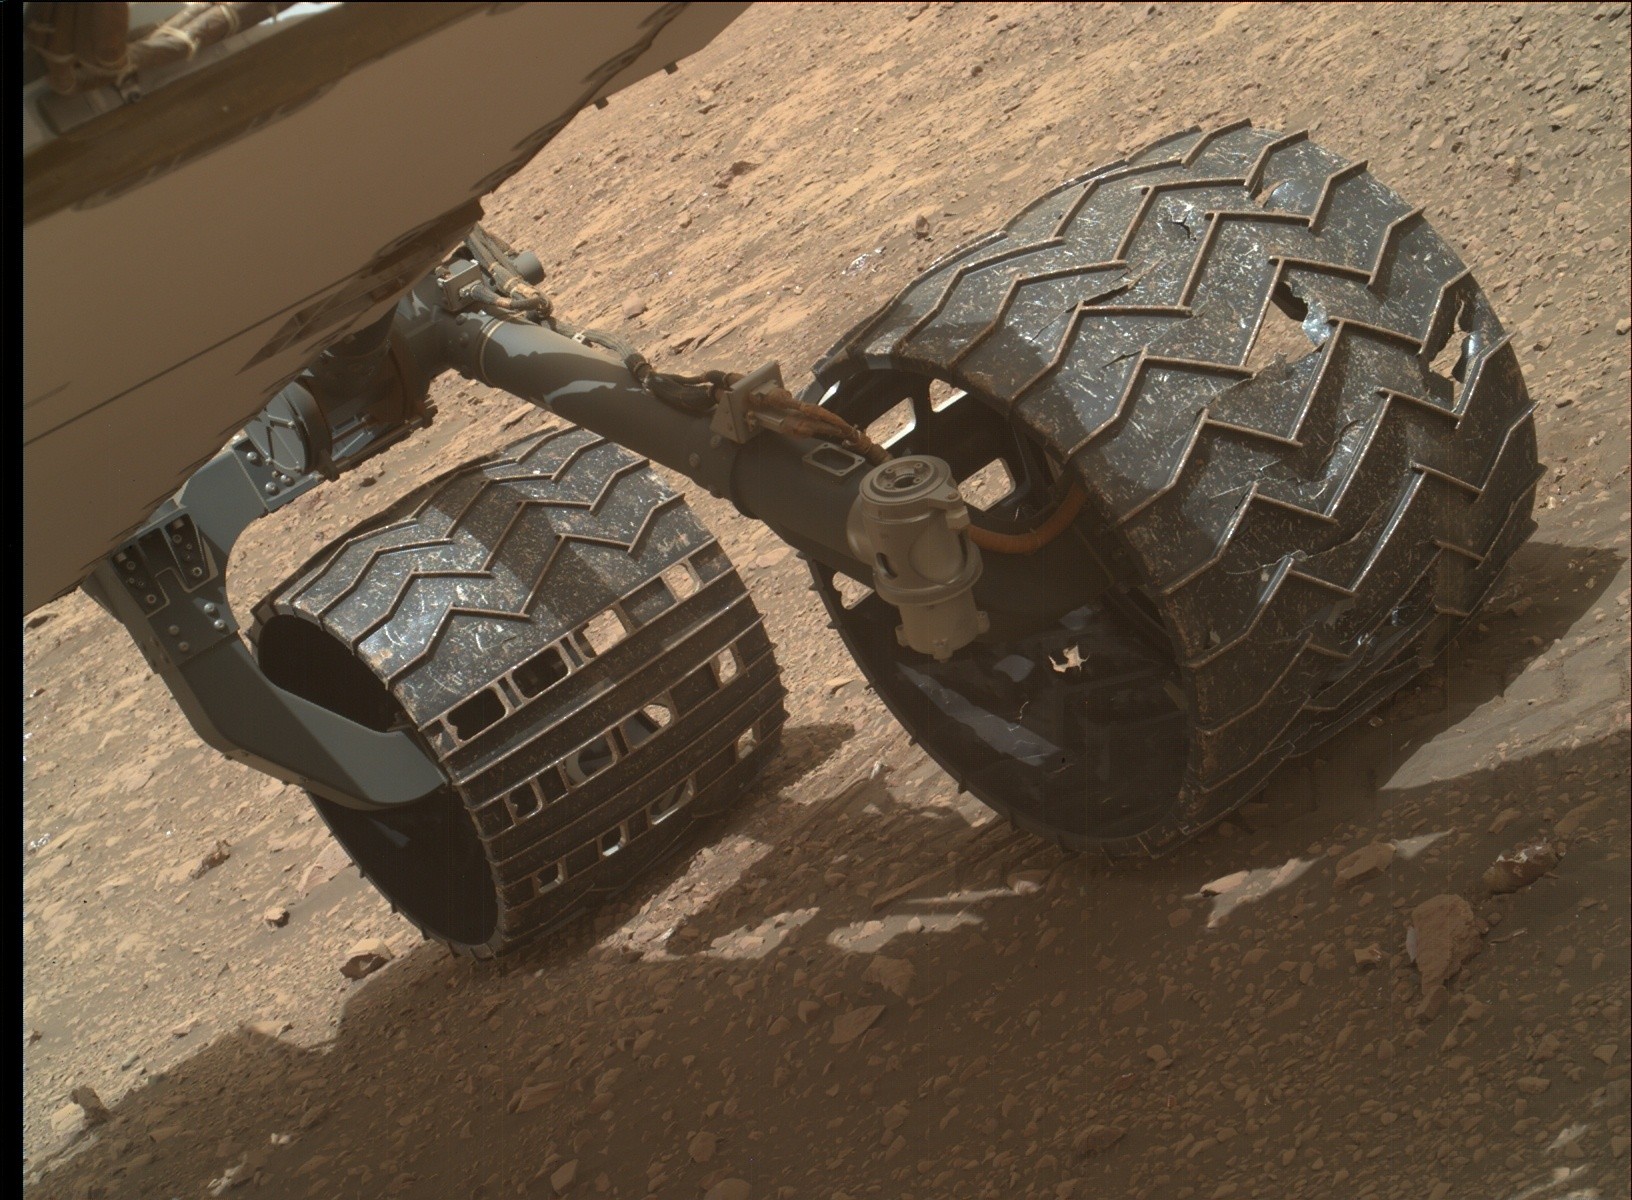 The wheels of the Curiosity Rover have been damaged over the years.  NASA suspects that some of the broken wheels may be scattered along the rover's track.  Photo = NASA/JPL-Caltech